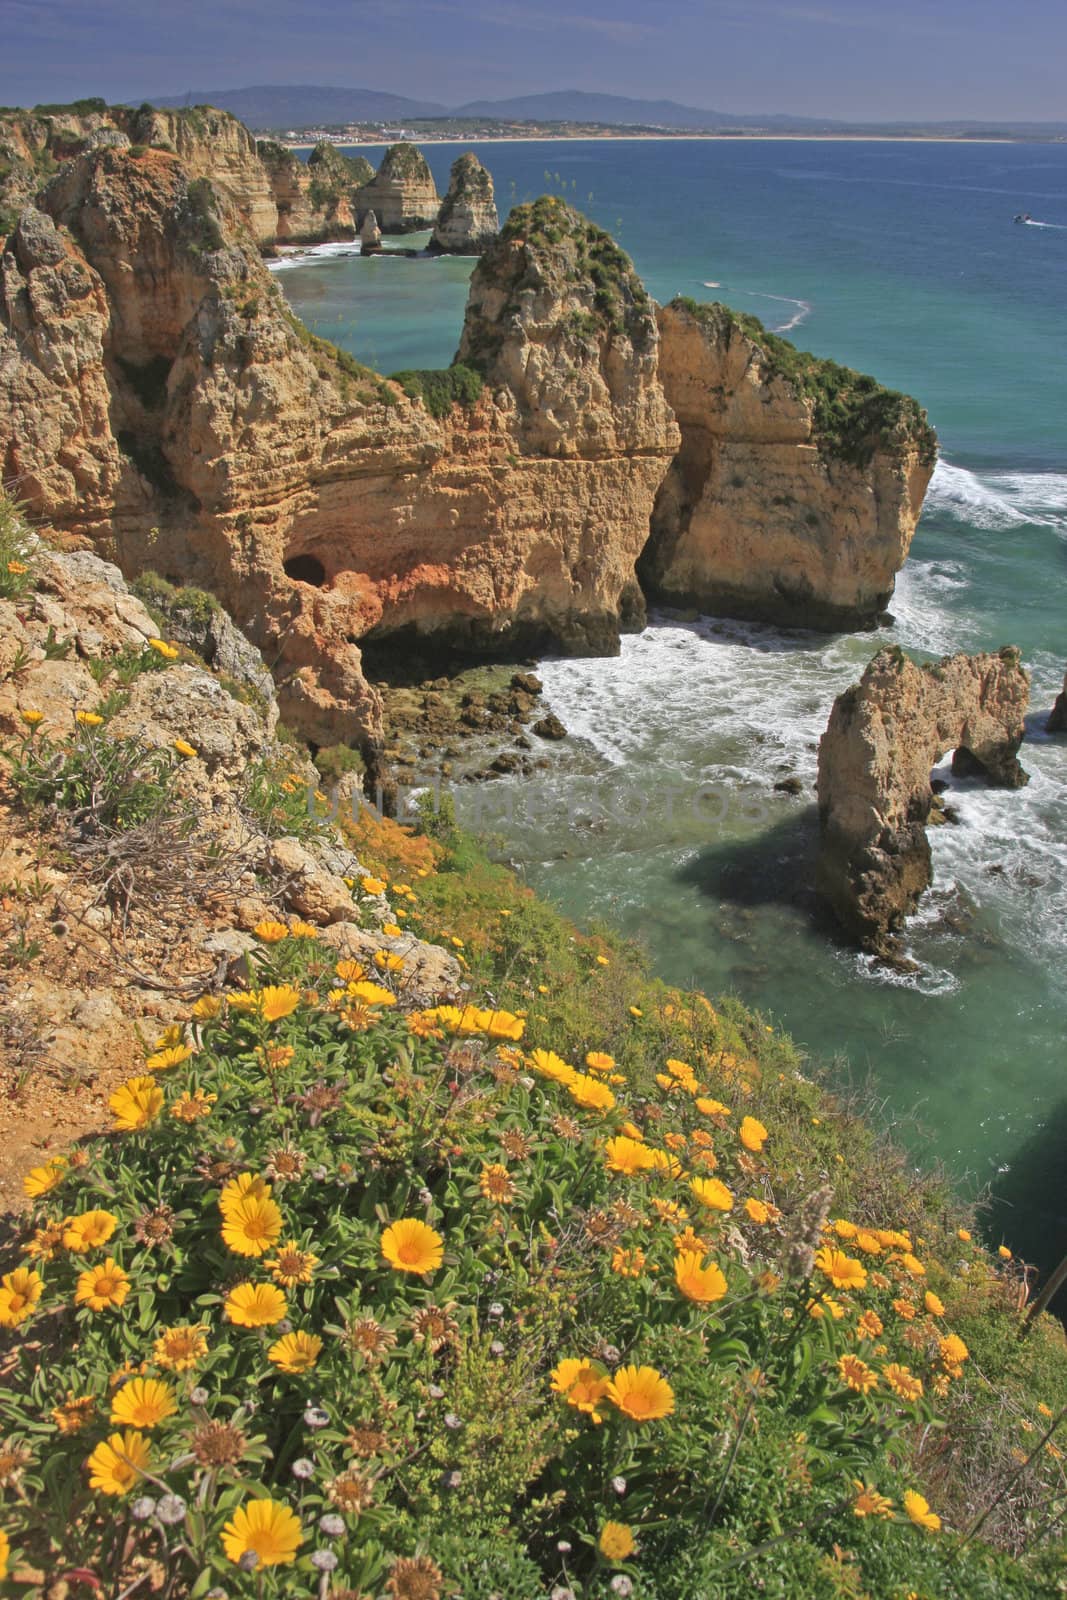 Flowers and seaside cliffs, Algarve, Portugal by donya_nedomam